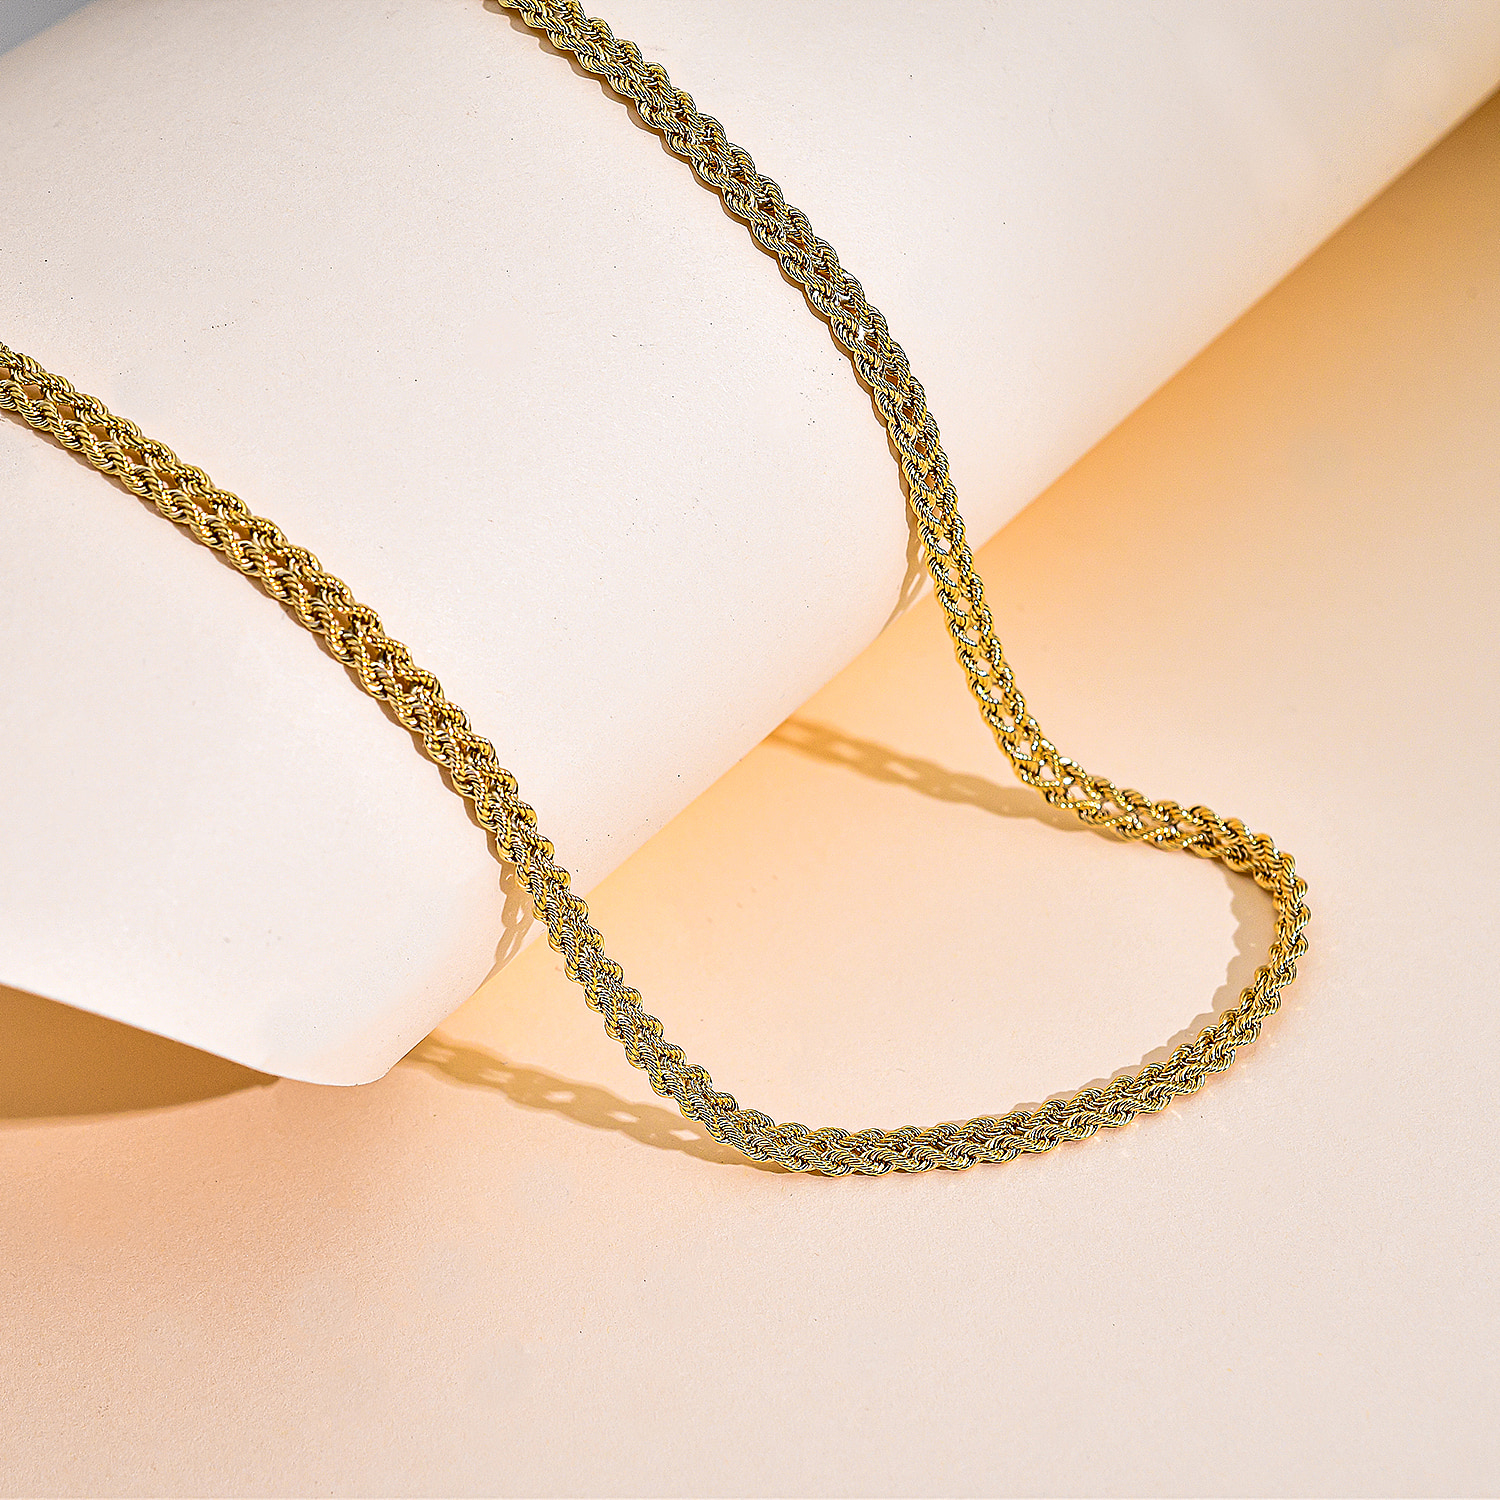 Maestro Collection Italian Made- 9K Yellow Gold Rope Necklace (Size-20) with Lobster Clasp, Gold Wt. 4.70 Gms